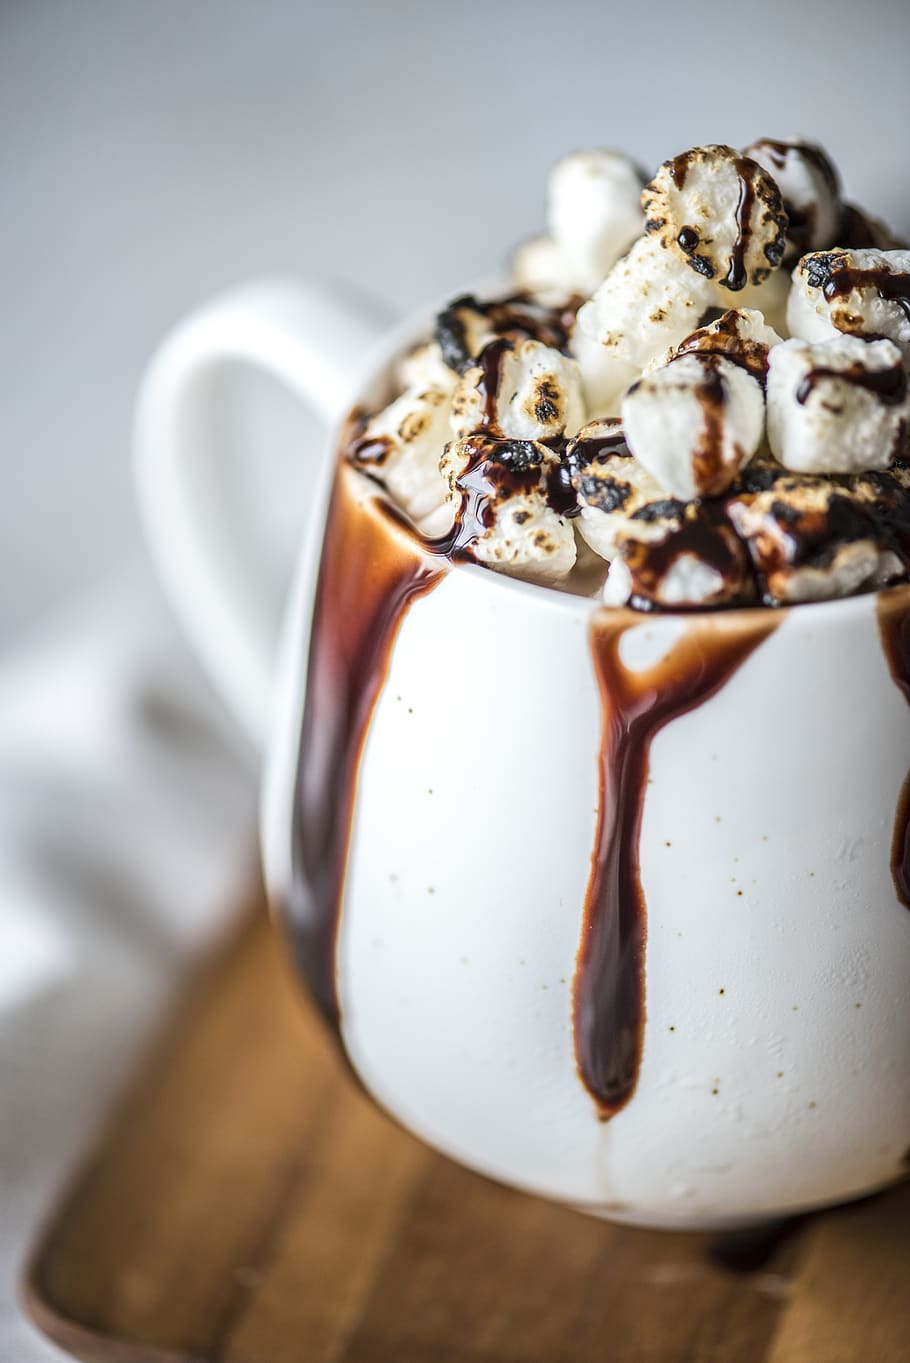 beverage, brown, cacao, chocolate, chocolate syrup, christmas, closeup, coco, cocoa, cold